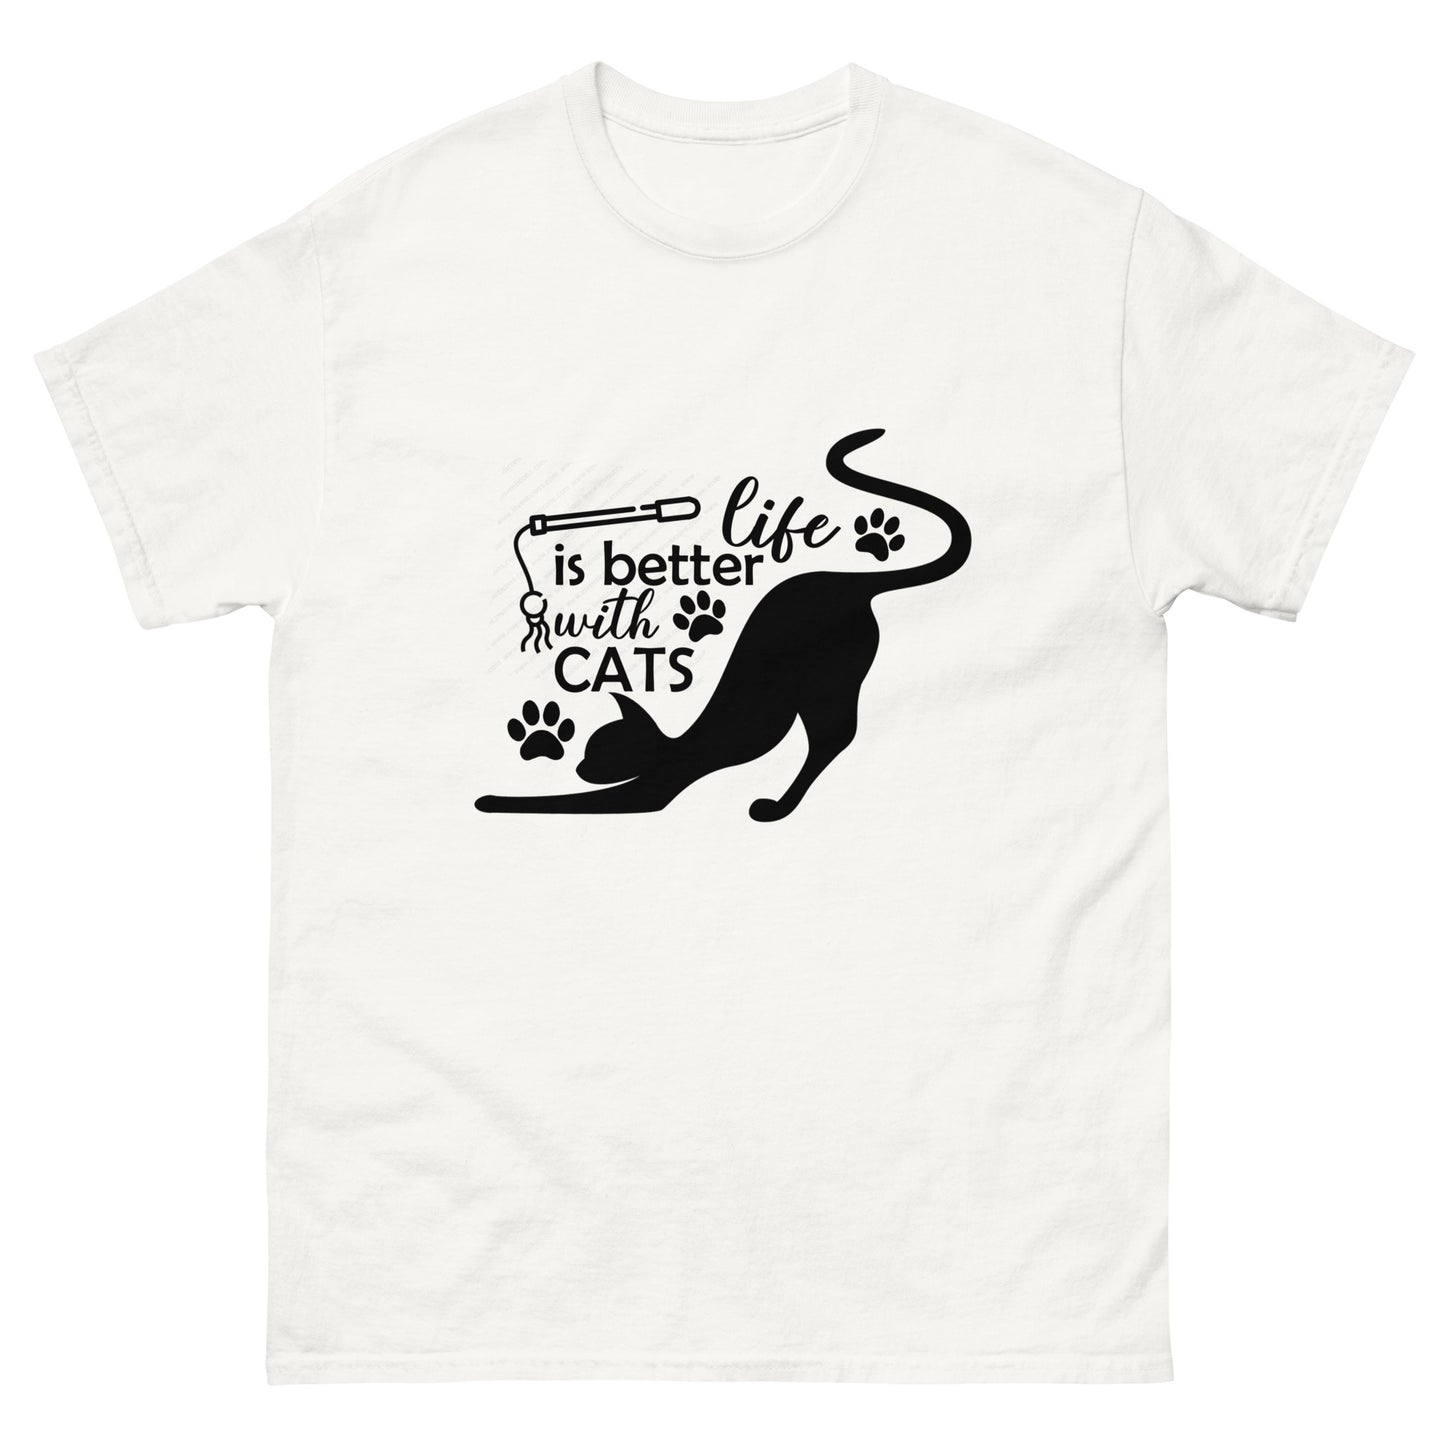 Life is better with cats - classic tee